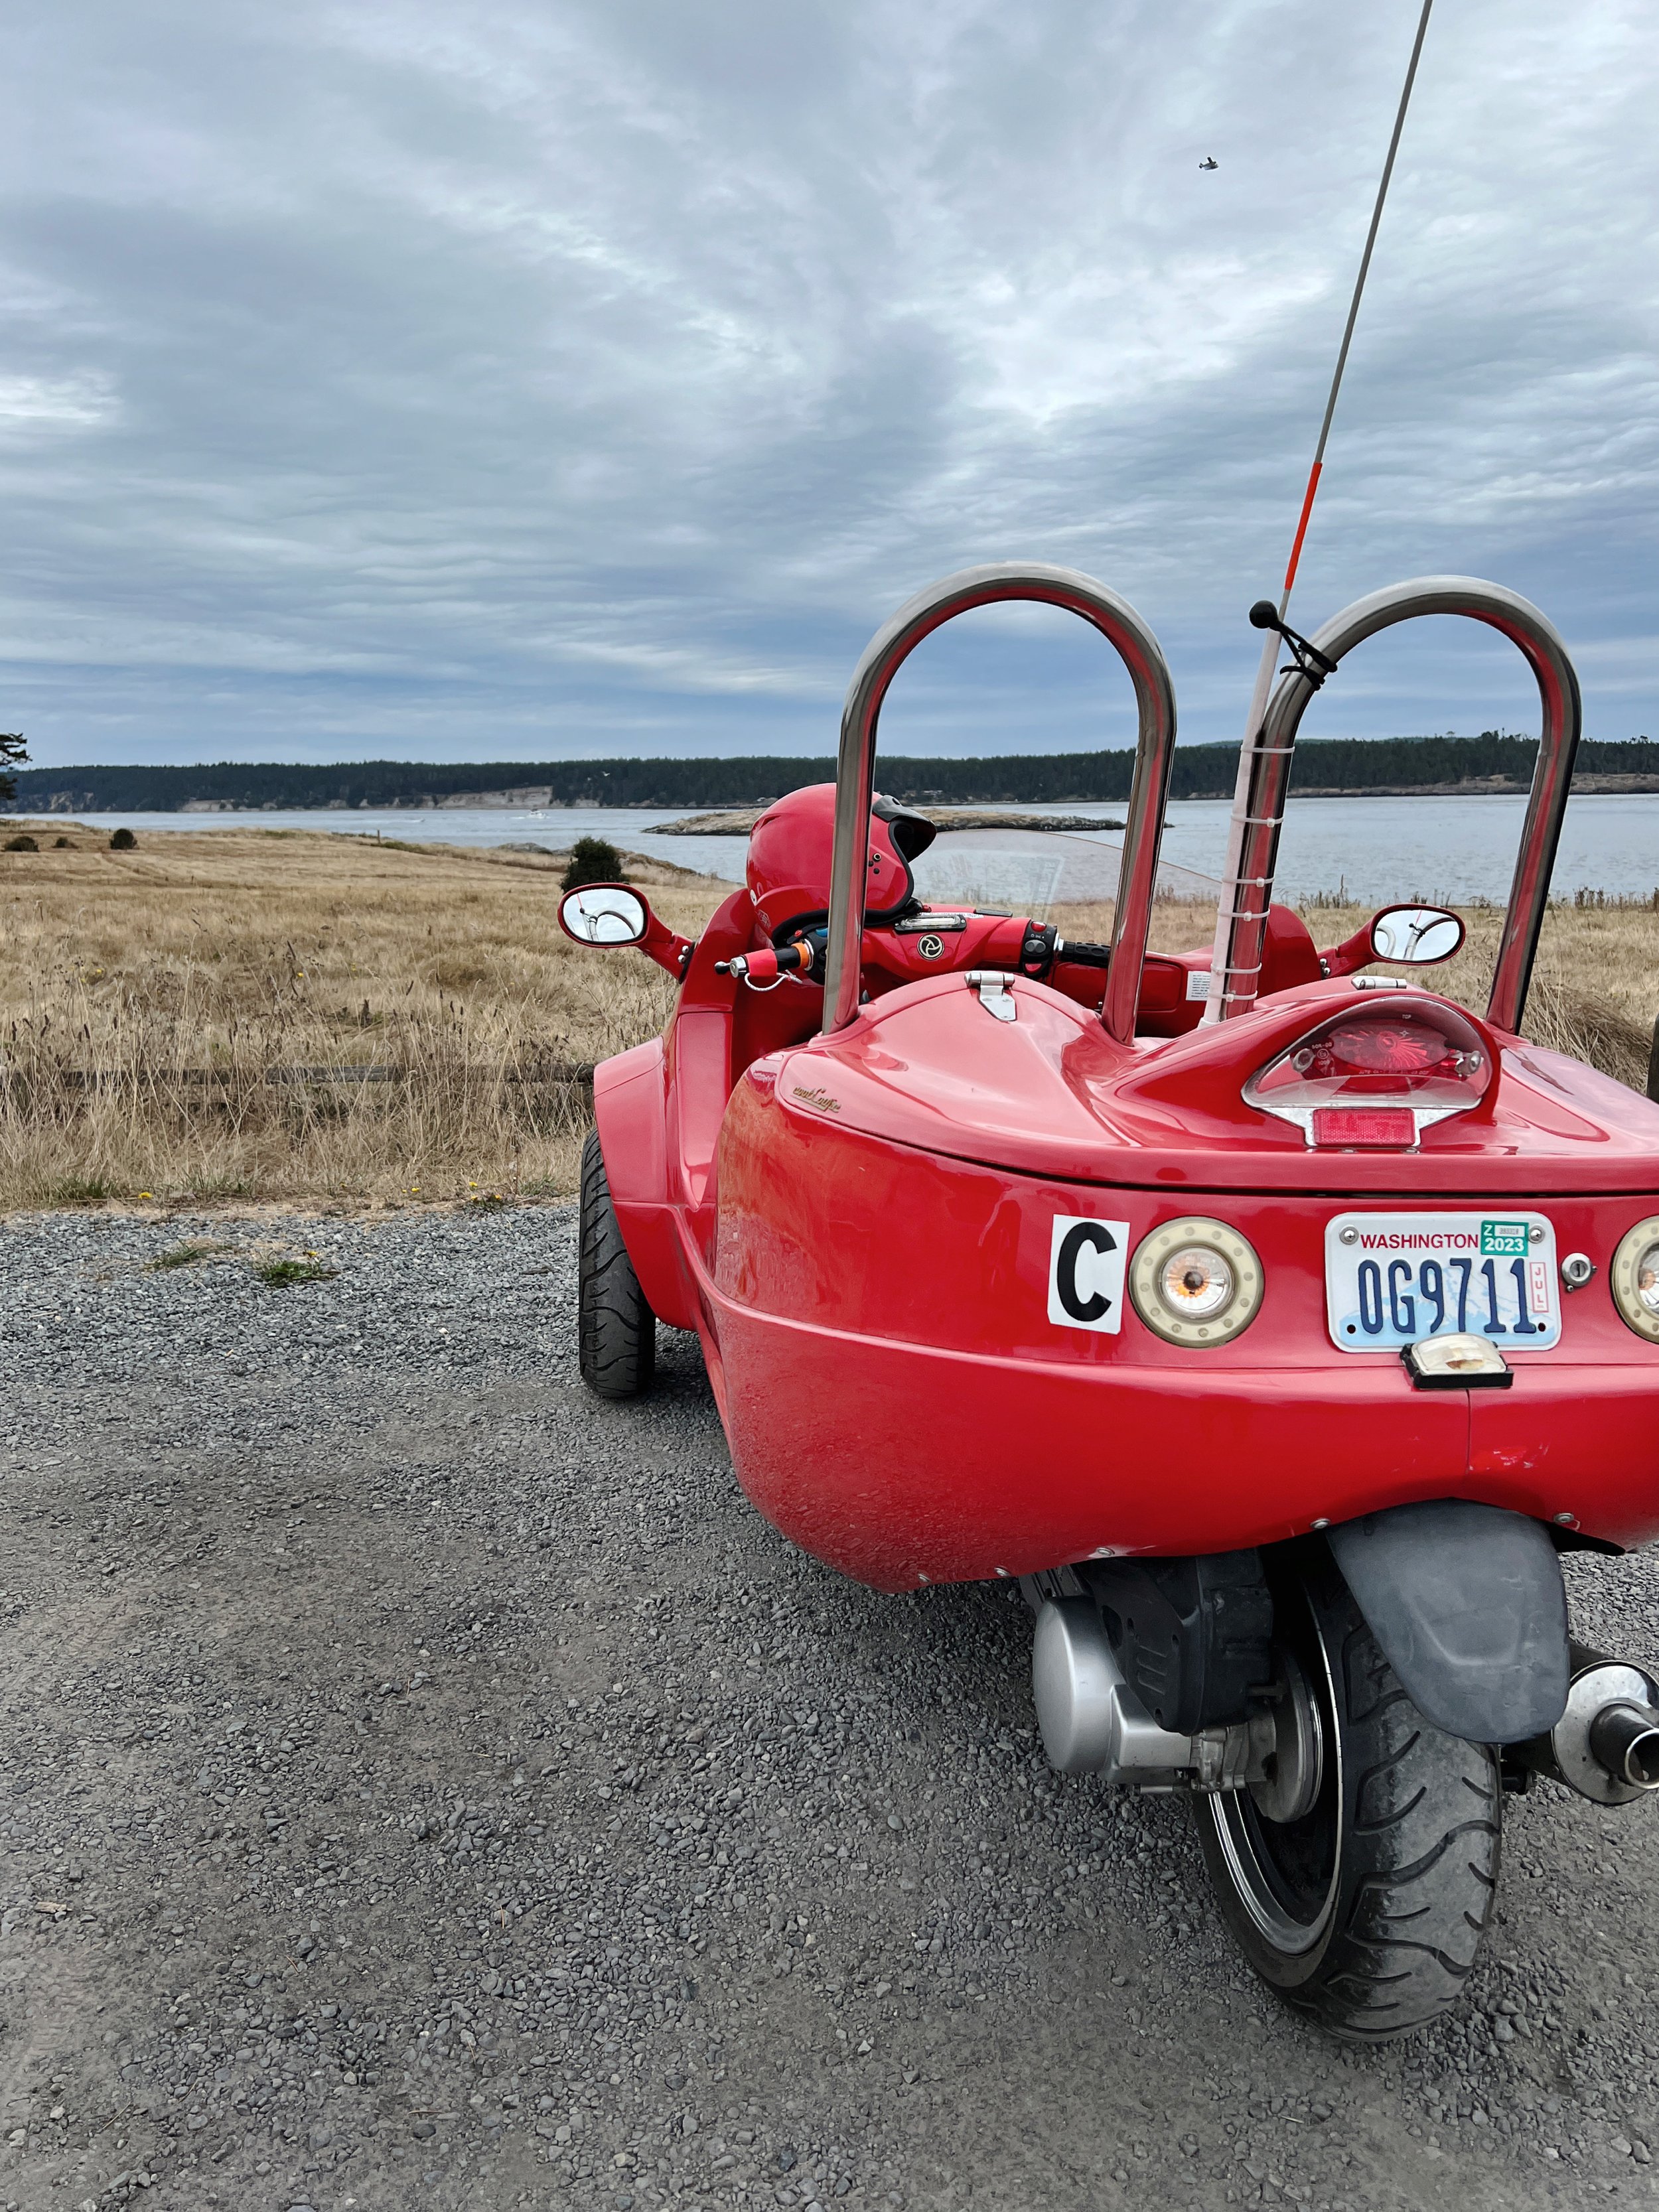 Susies Mopeds San Juan Island Full Review Scoot Coupe